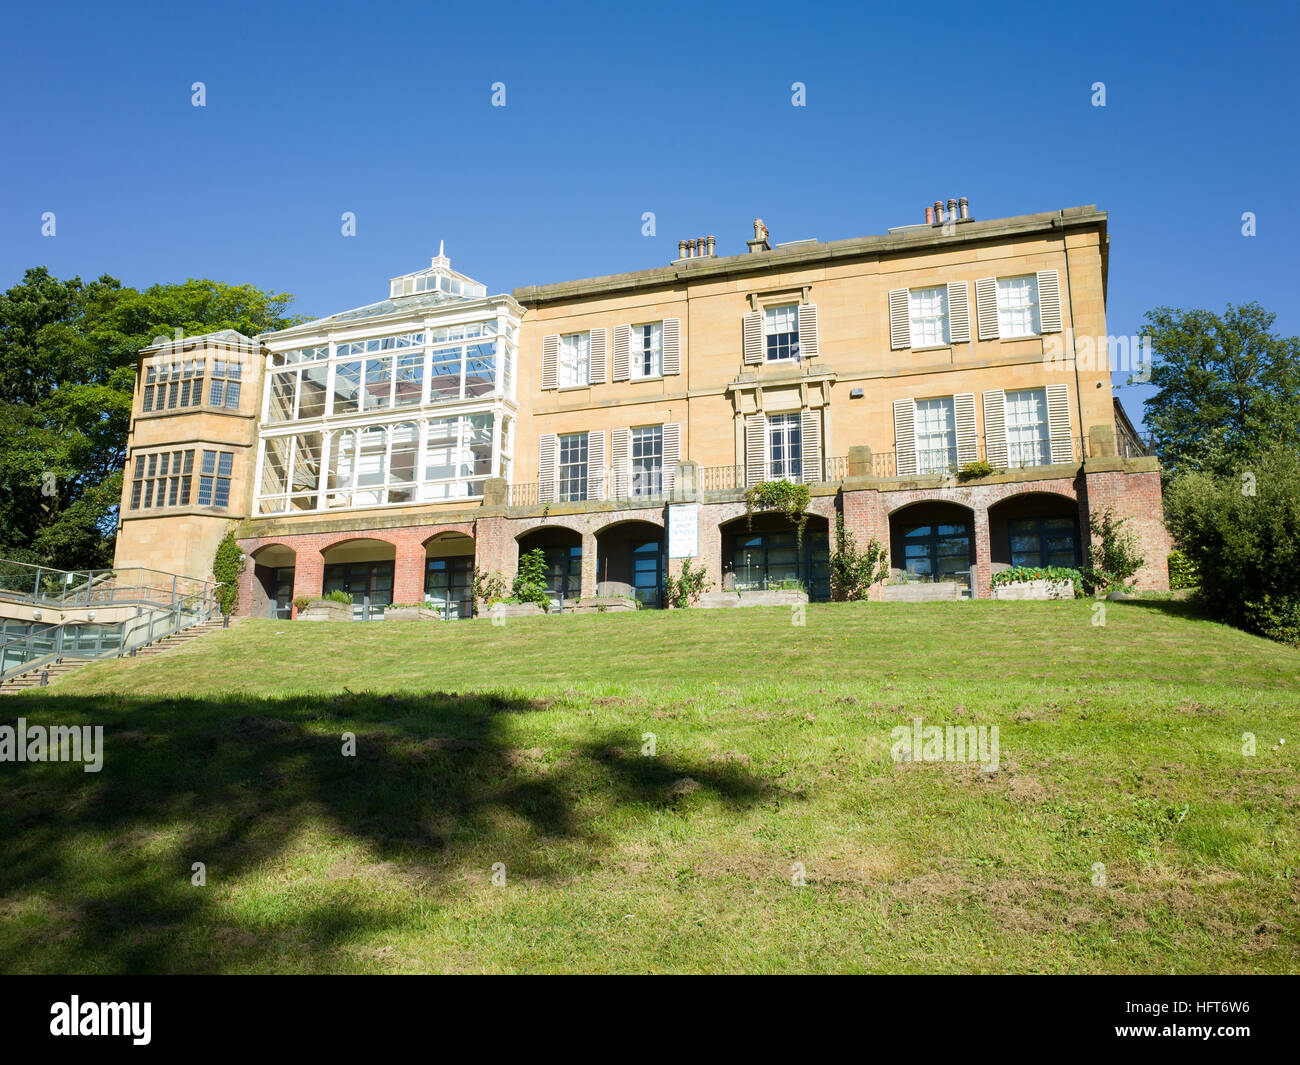 Woodend Scarborough UK Previous home to Sitwell family 1870 to 1934 and also a natural History Museum House was built in 1835 Stock Photo